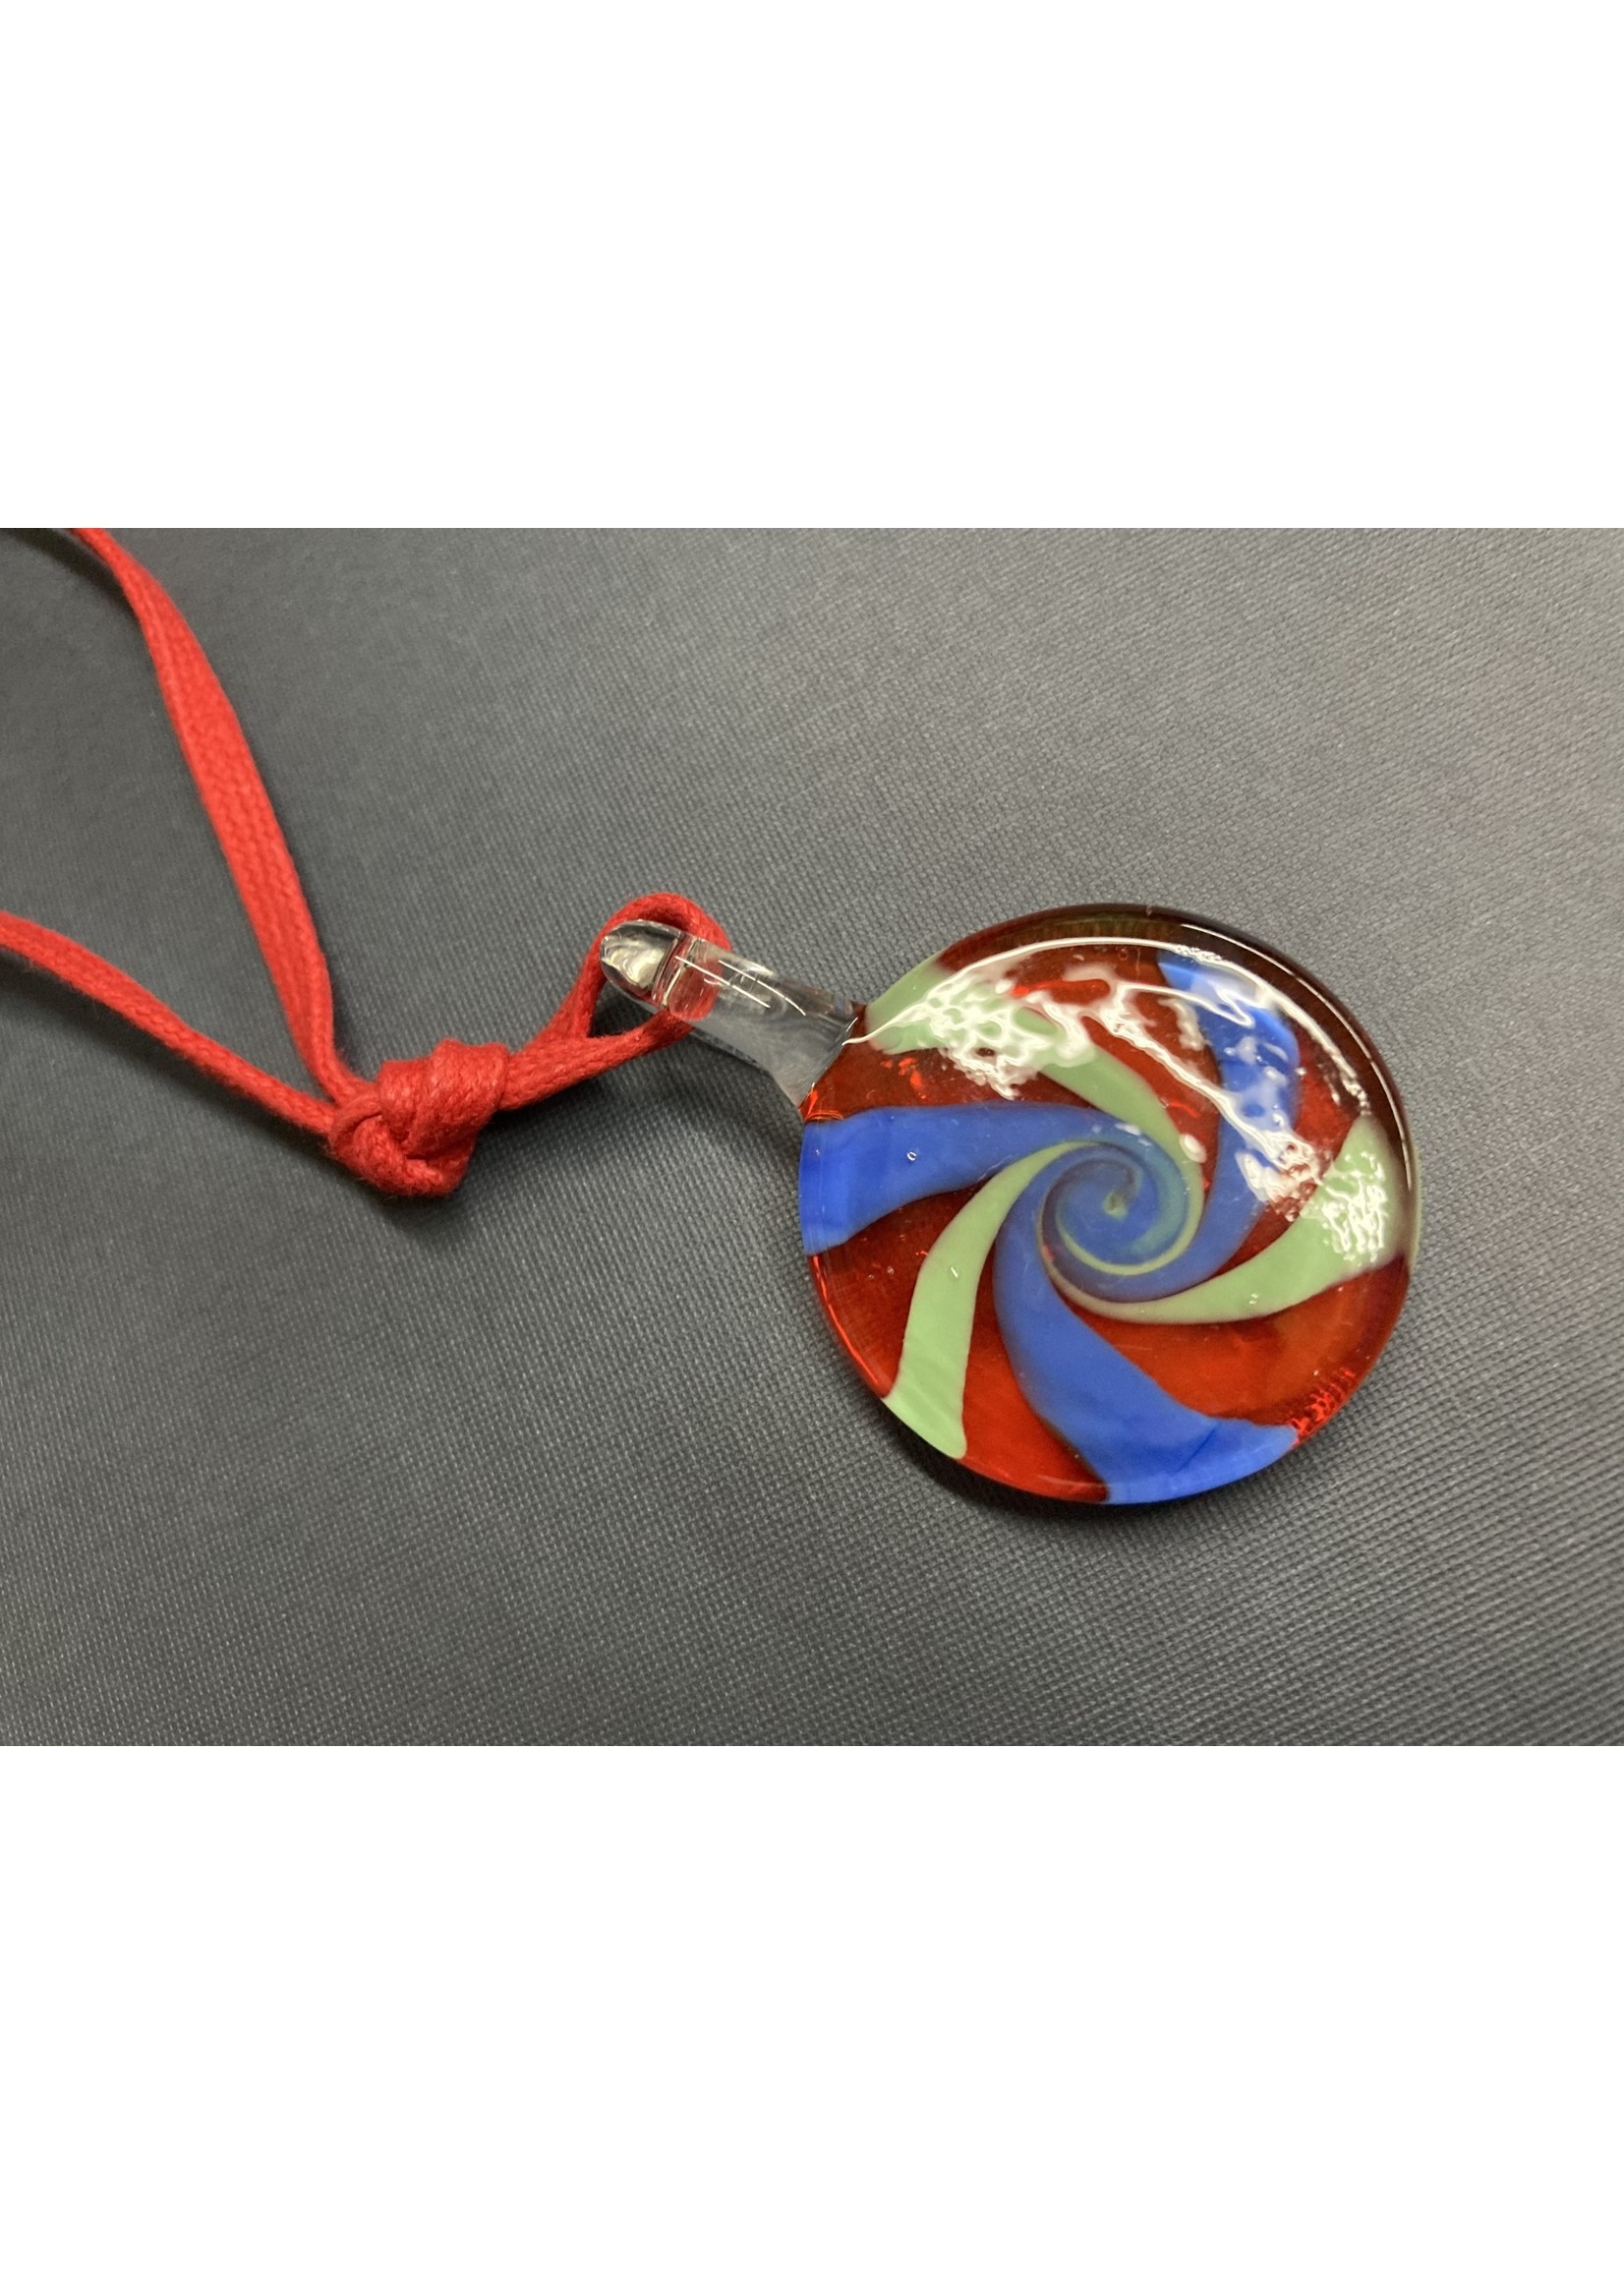 Our Twisted Dahlia N216 Handmade Glass Pendant in Red with Woven Necklace